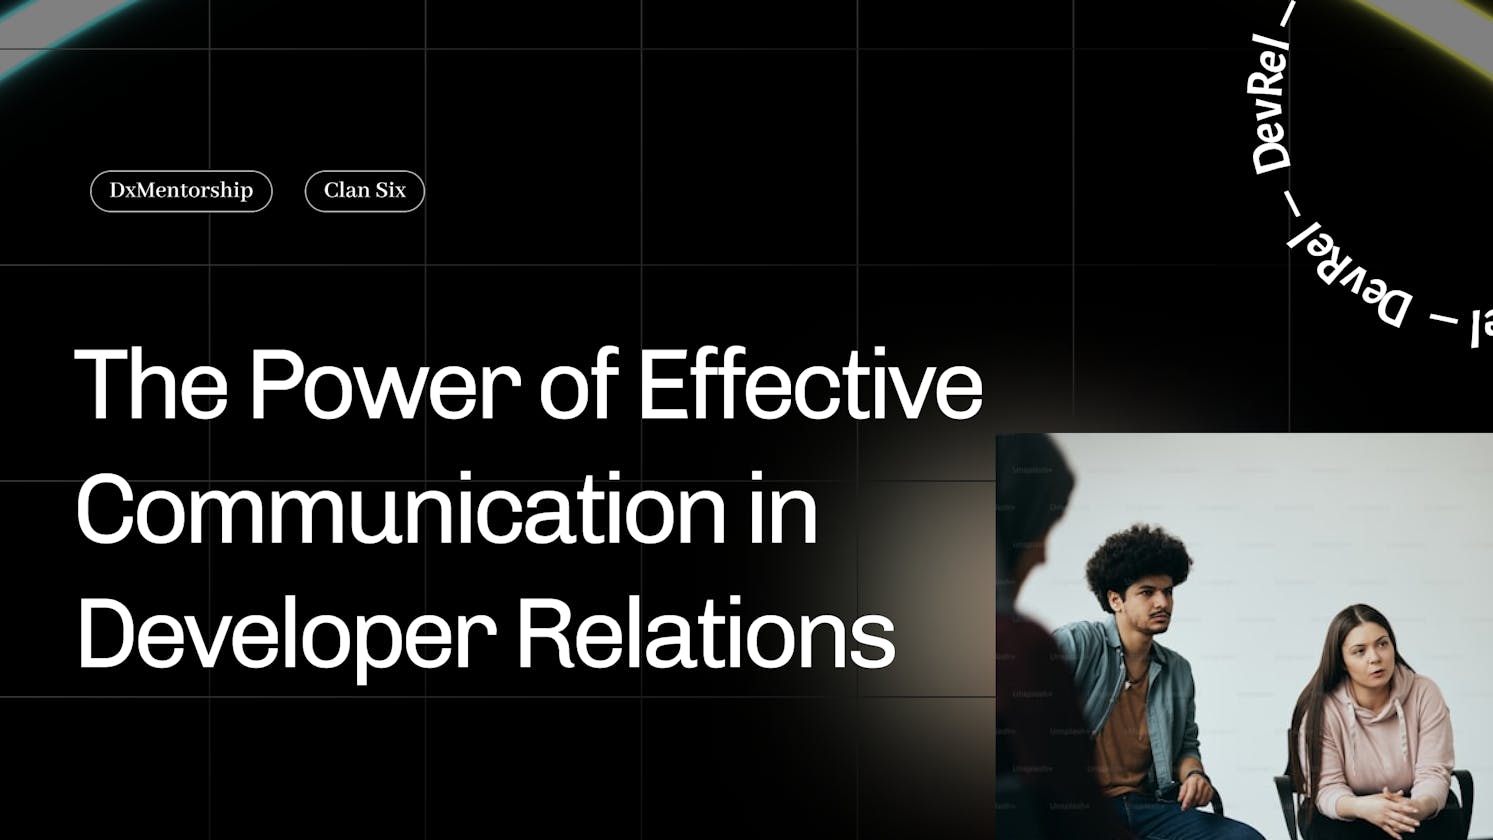 The Power of Effective Communication in Developer Relations